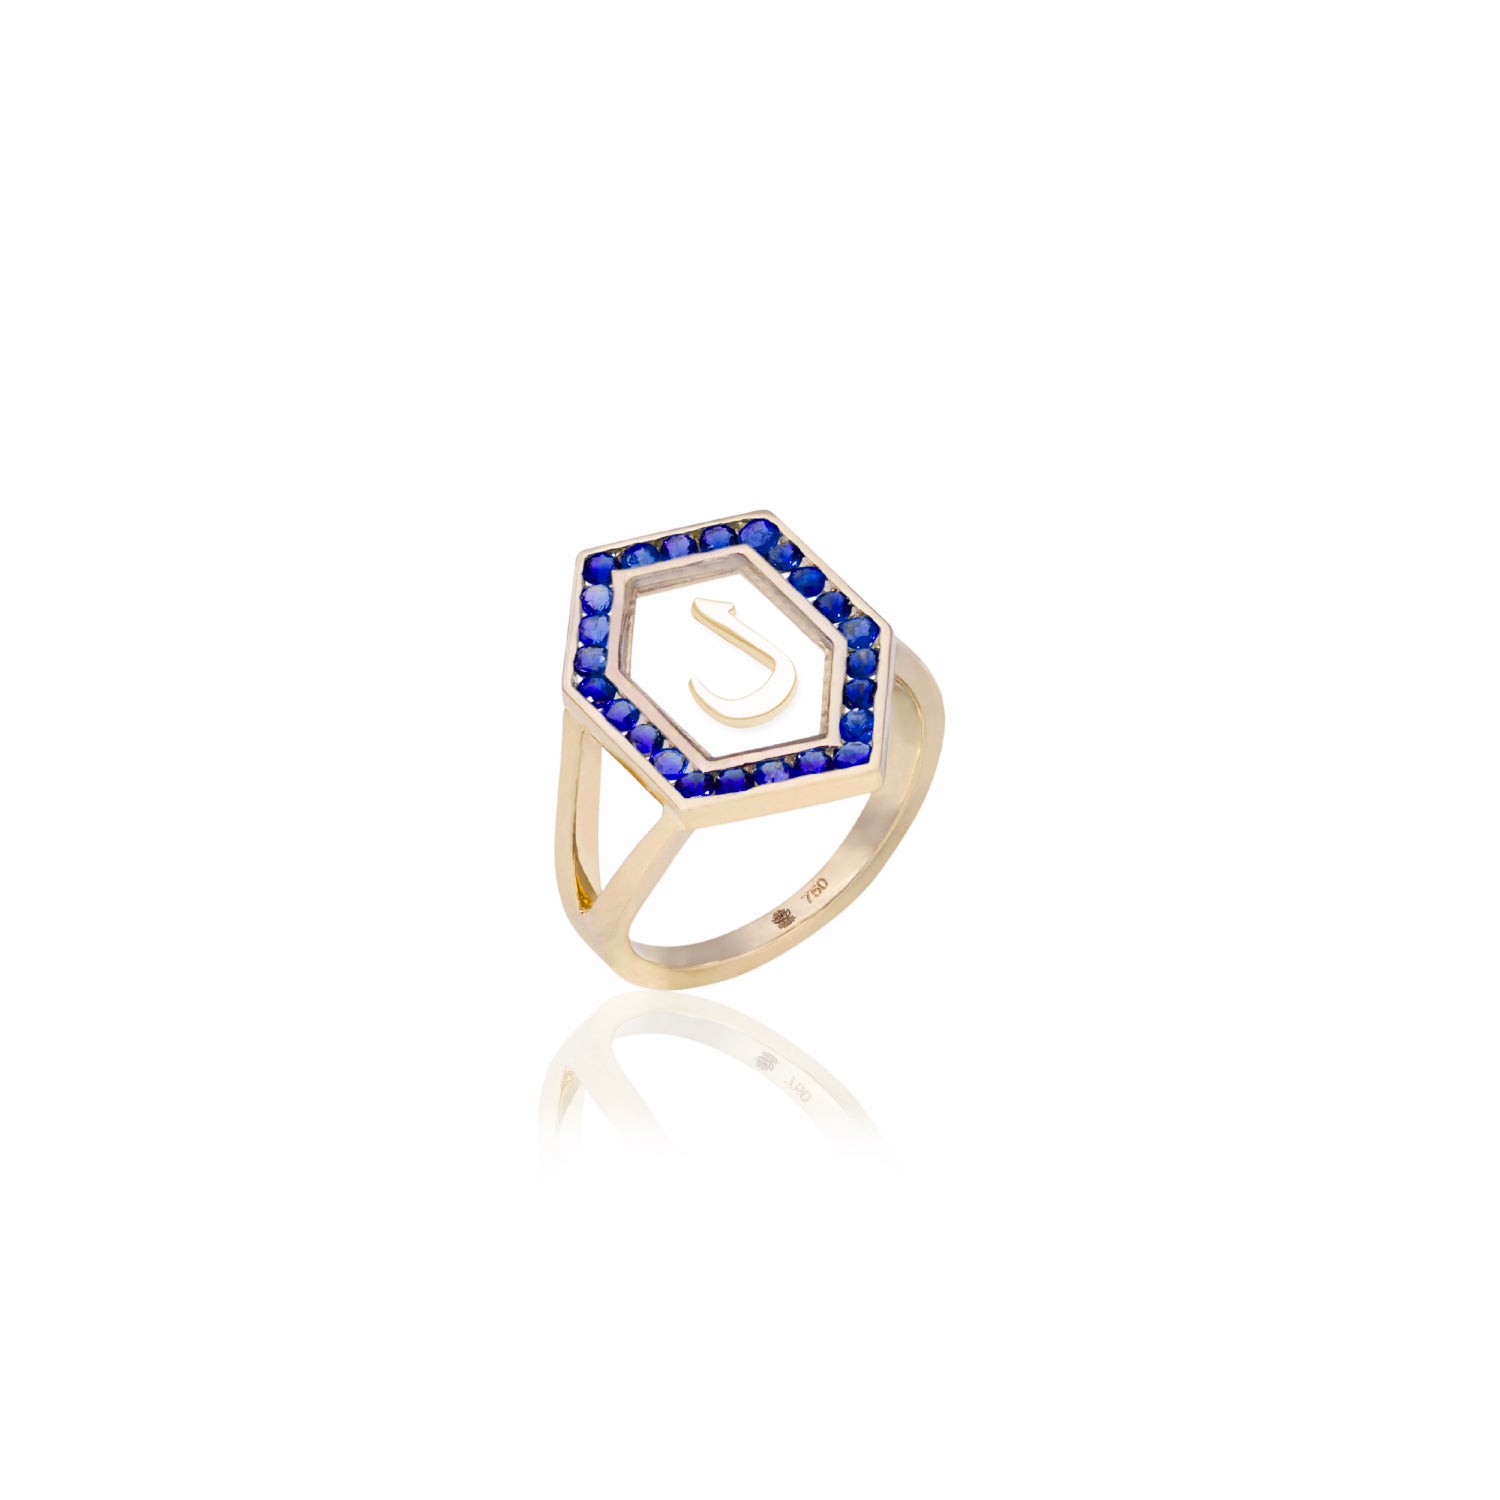 Qamoos 1.0 Letter ل Sapphire Ring in Yellow Gold